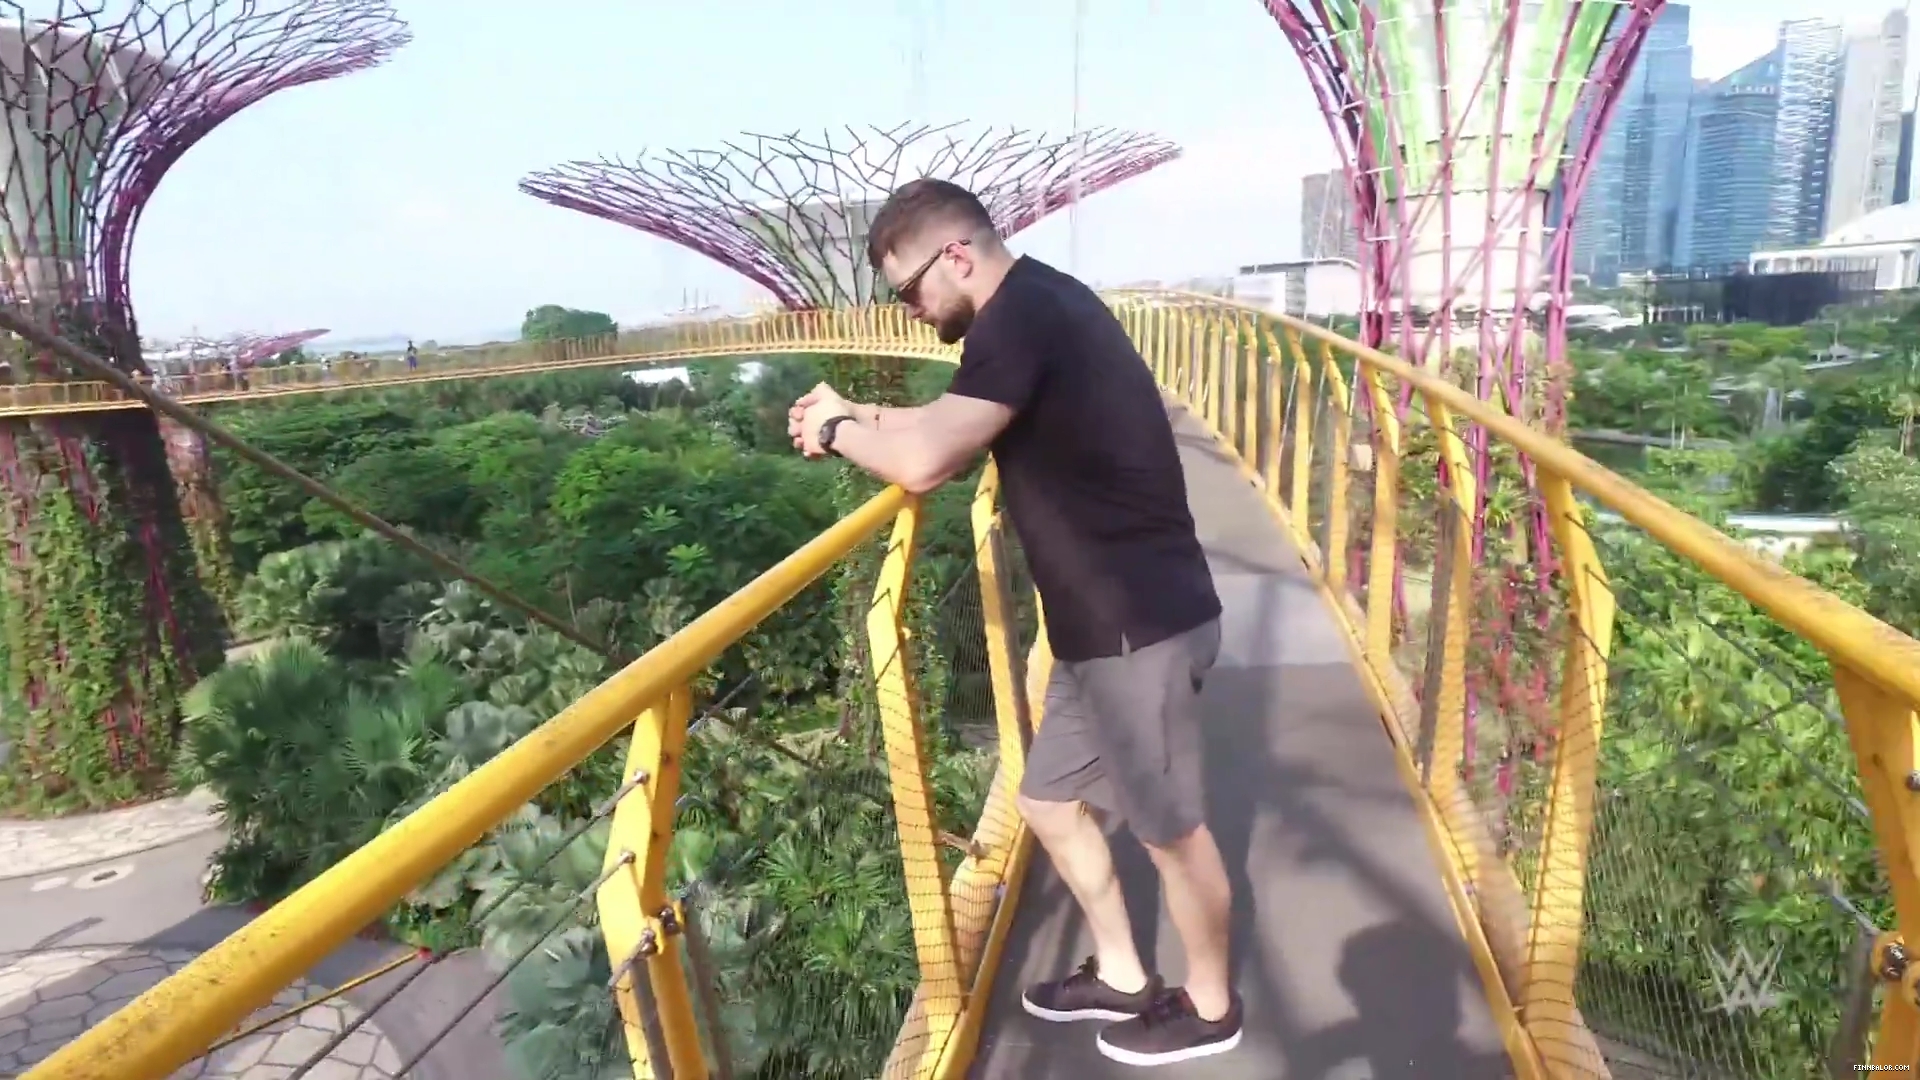 Finn_Balor_feels_like_he_is_in__Star_Wars__while_touring_Singapore_s_Supertree__mp40035.jpg